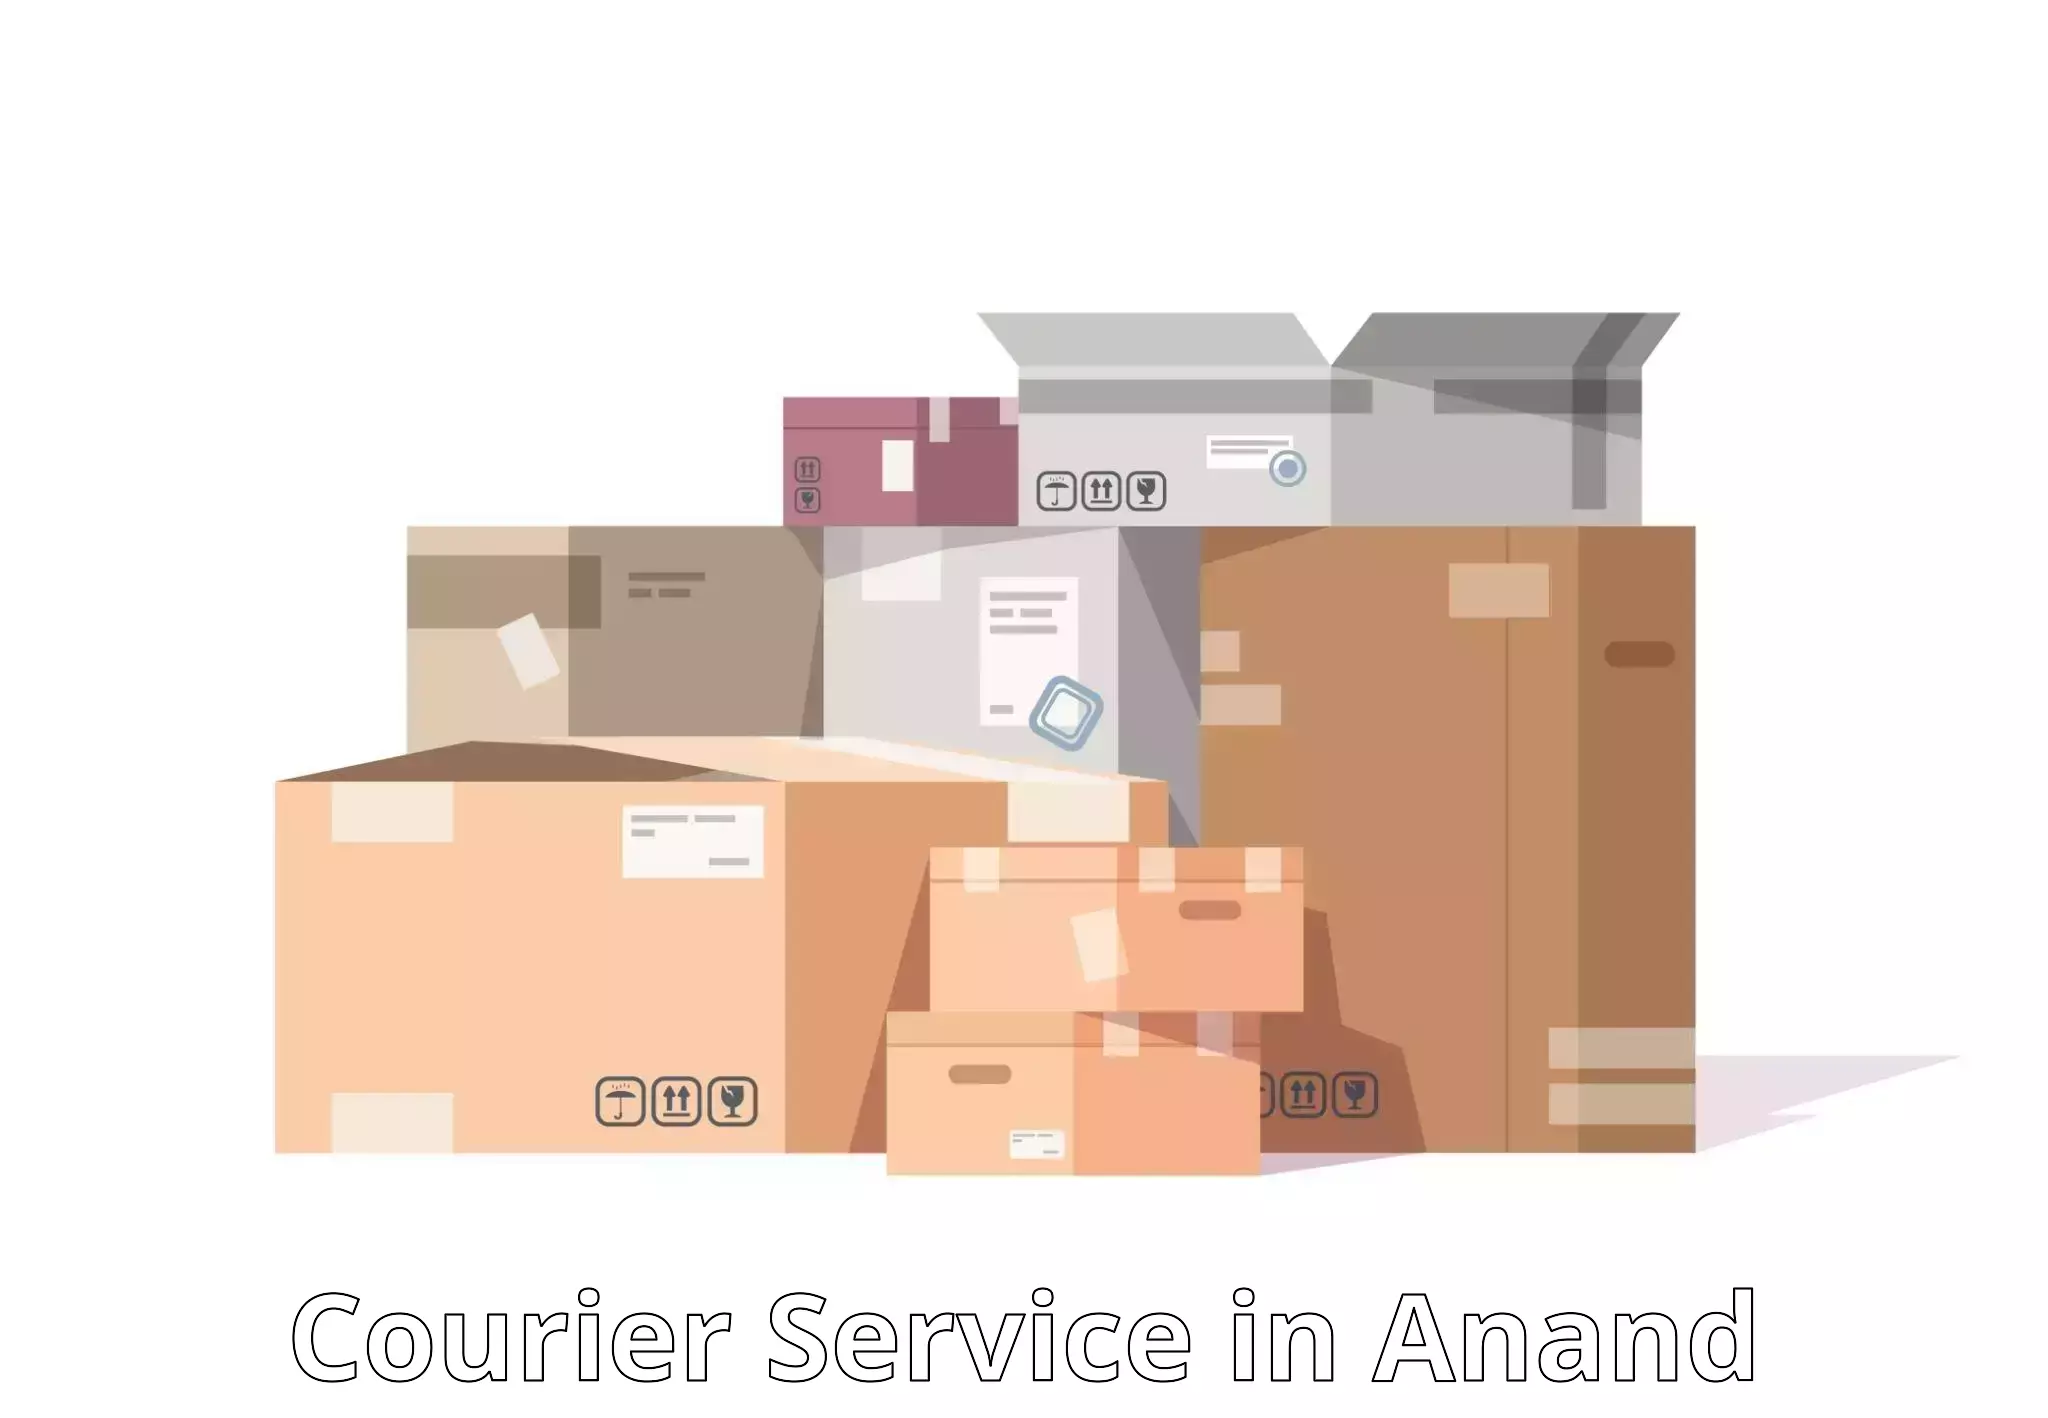 Streamlined shipping process in Anand